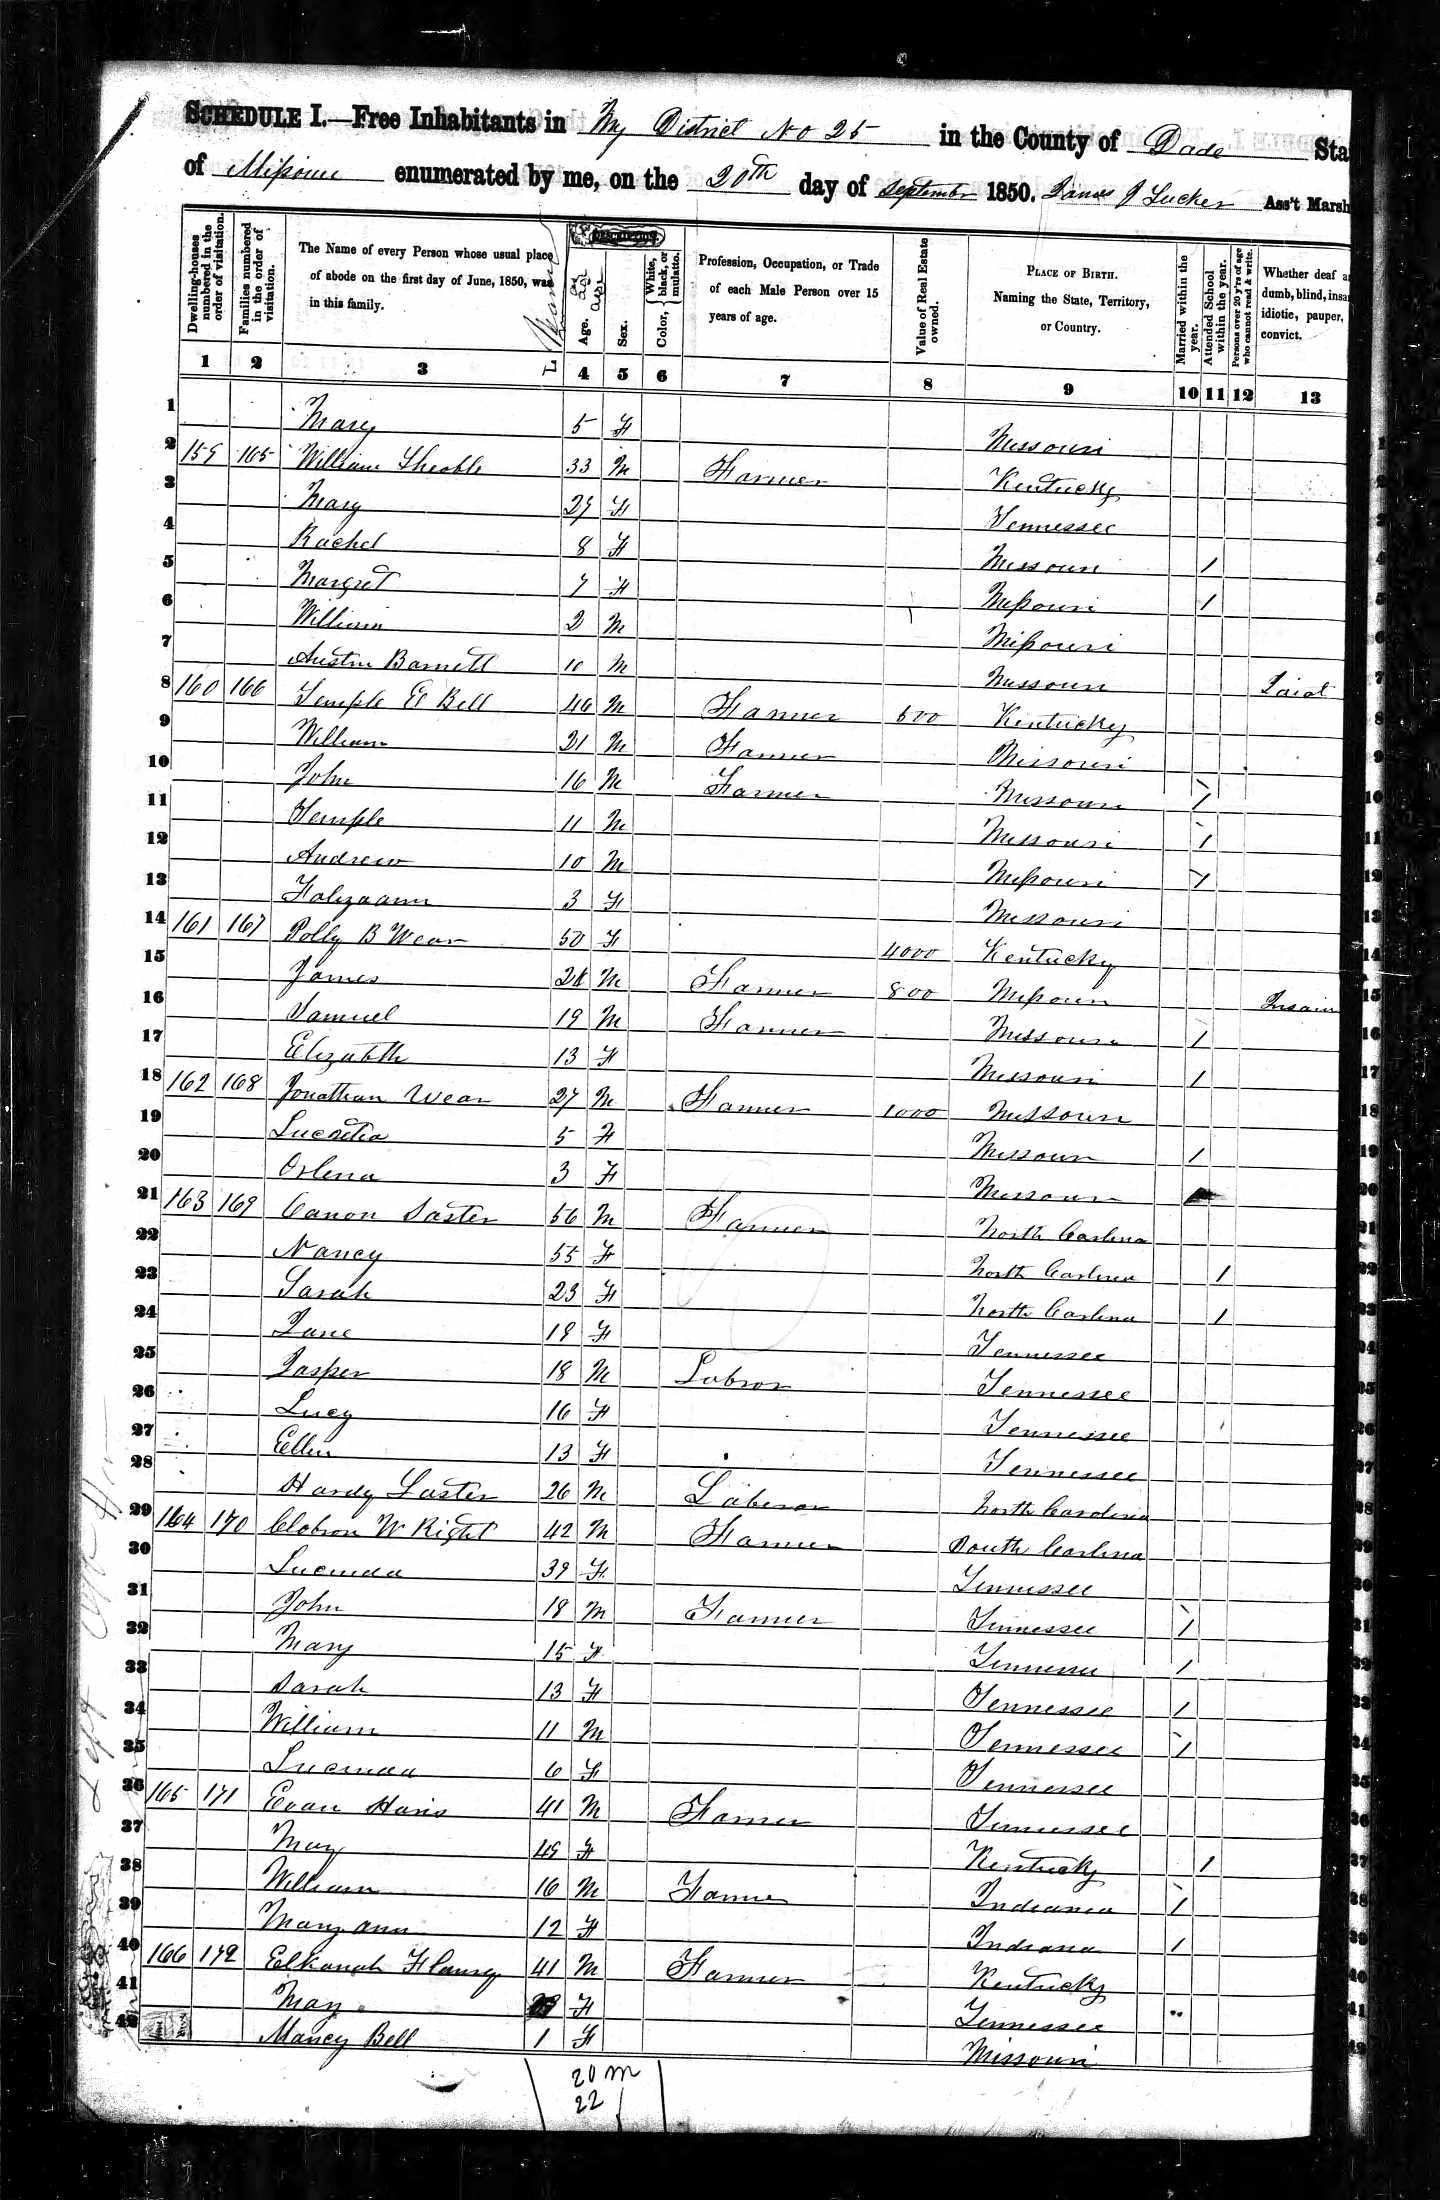 Hardy Lasater, in the Canon Lasater census enumeration, 1850 Dade County, Missouri